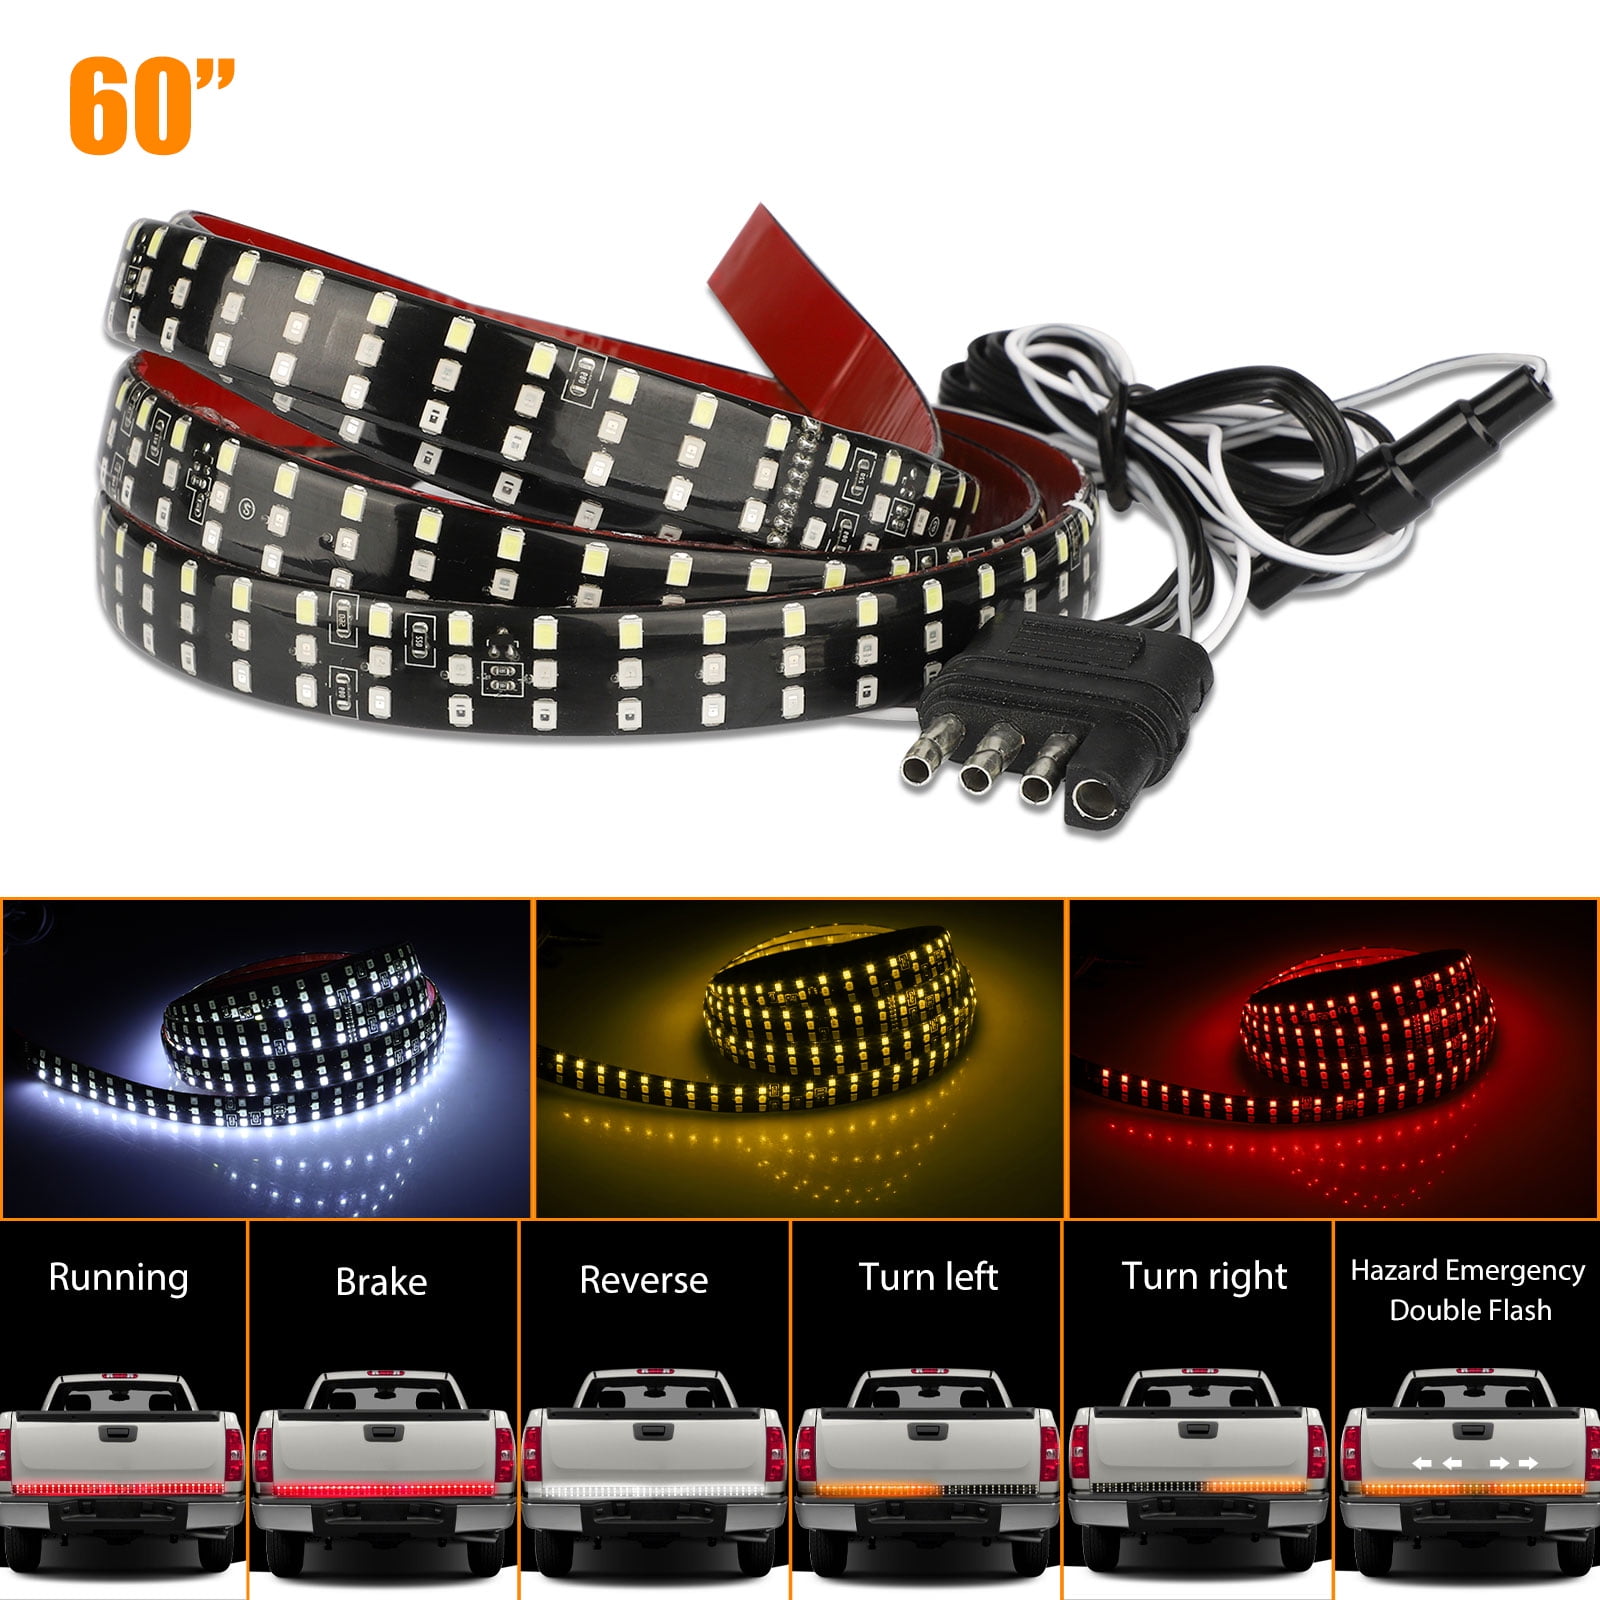 JUNEVEN 60 Inches Tailgate Light Bar Double Row LED Light Strip Brake Running Turn Signal Reverse Tail Lights for Trucks Trailer Pickup Car RV Van Jeep Towing Vehicle,Red White,No Drill 